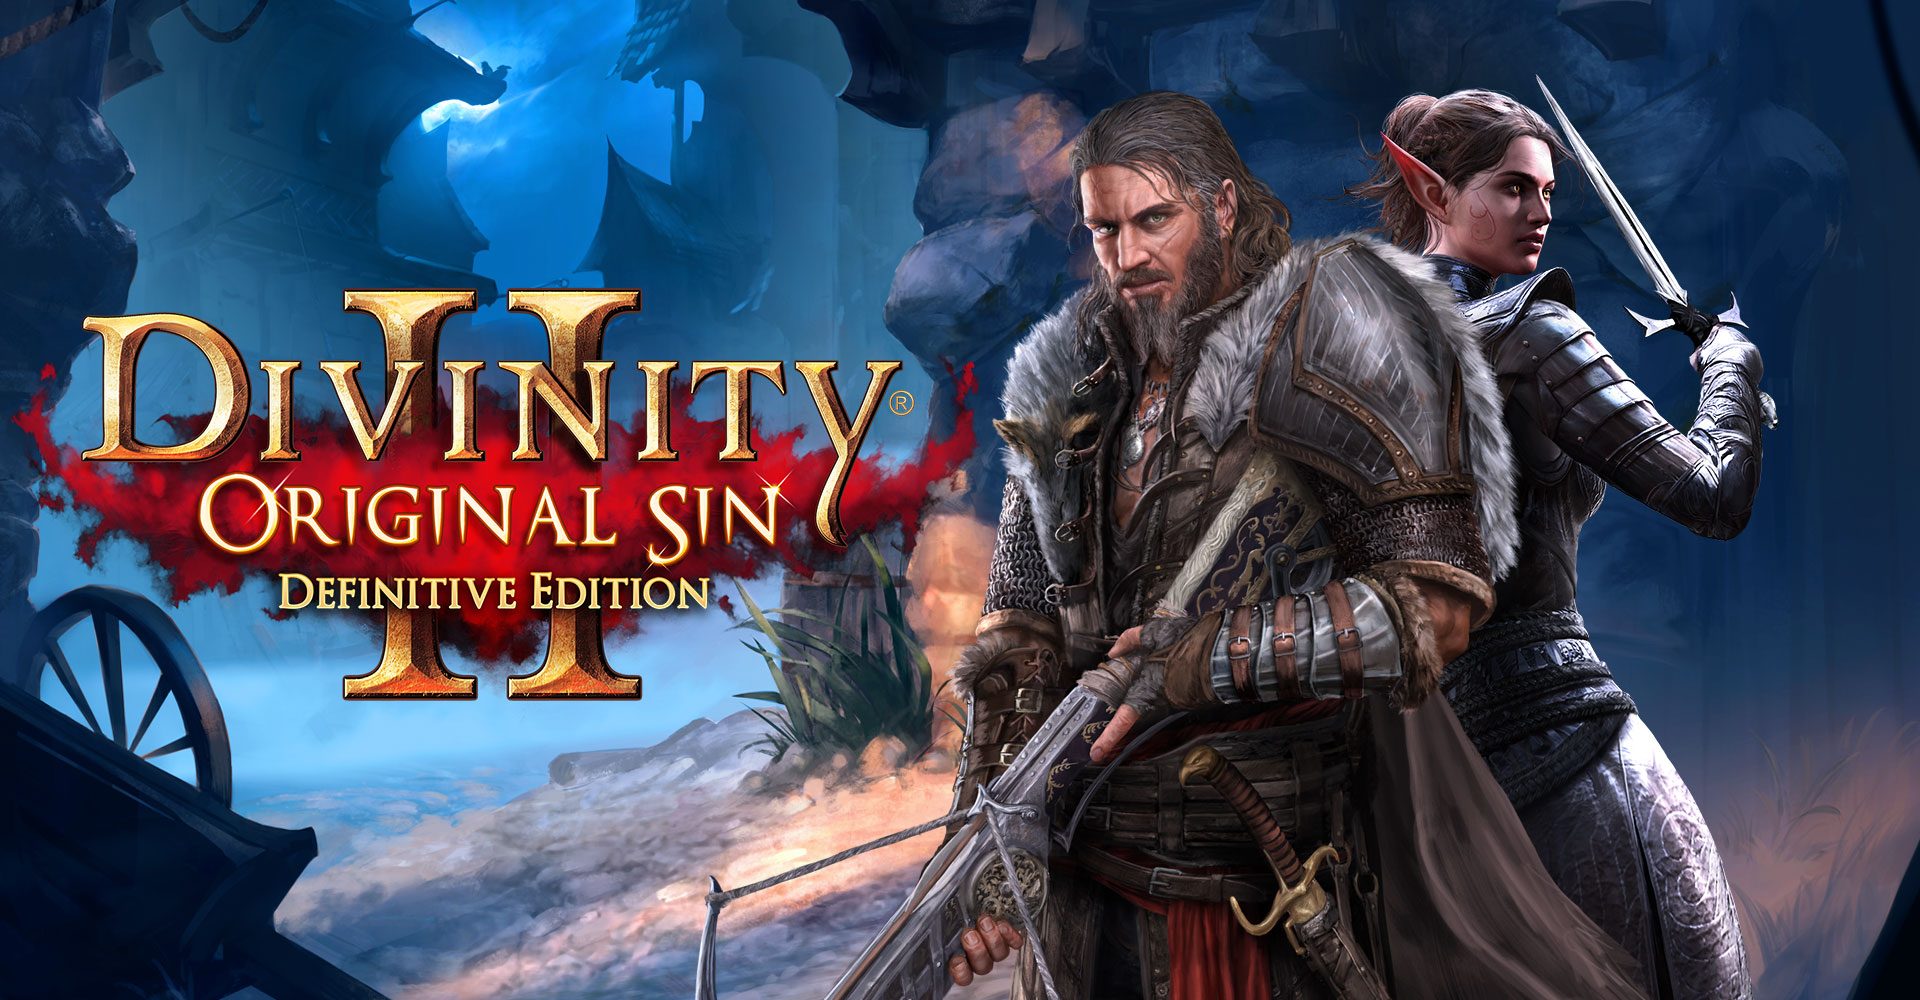 divinity-original-sin-ii-launches-the-four-relics-of-rivellon-with-a